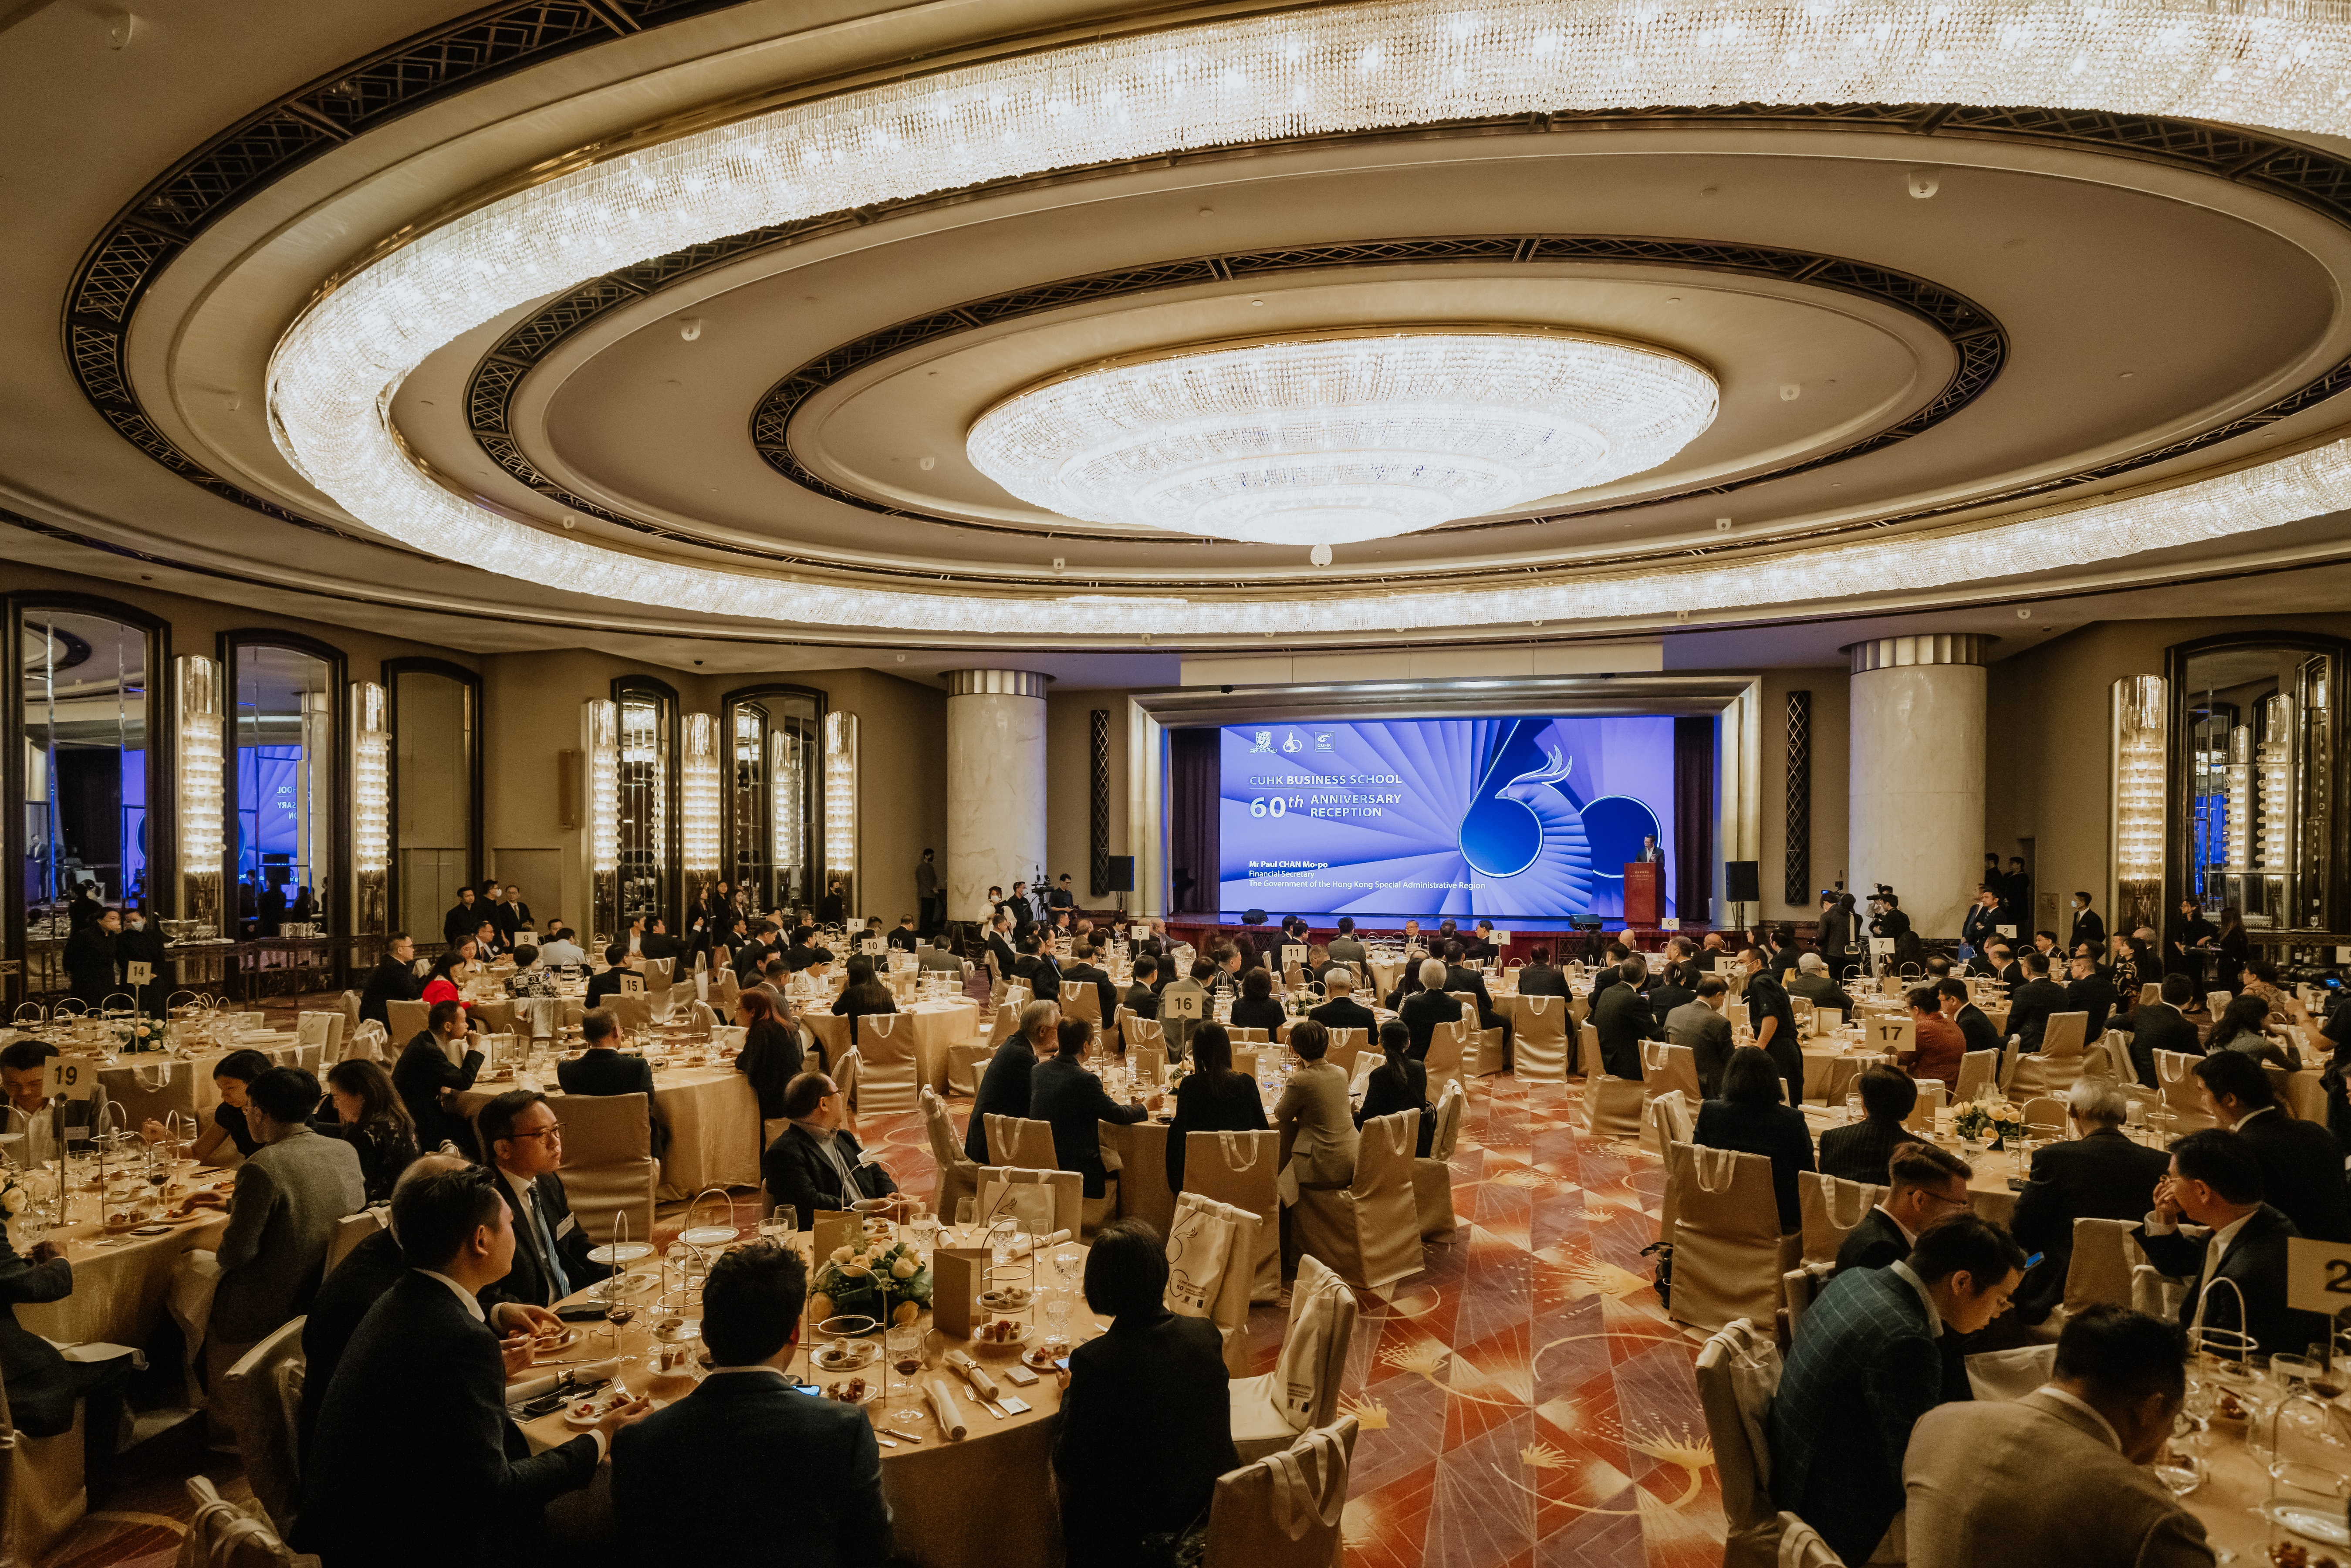 The event connected CUHK Business School’s remarkable alumni, major partners and university members across generations.